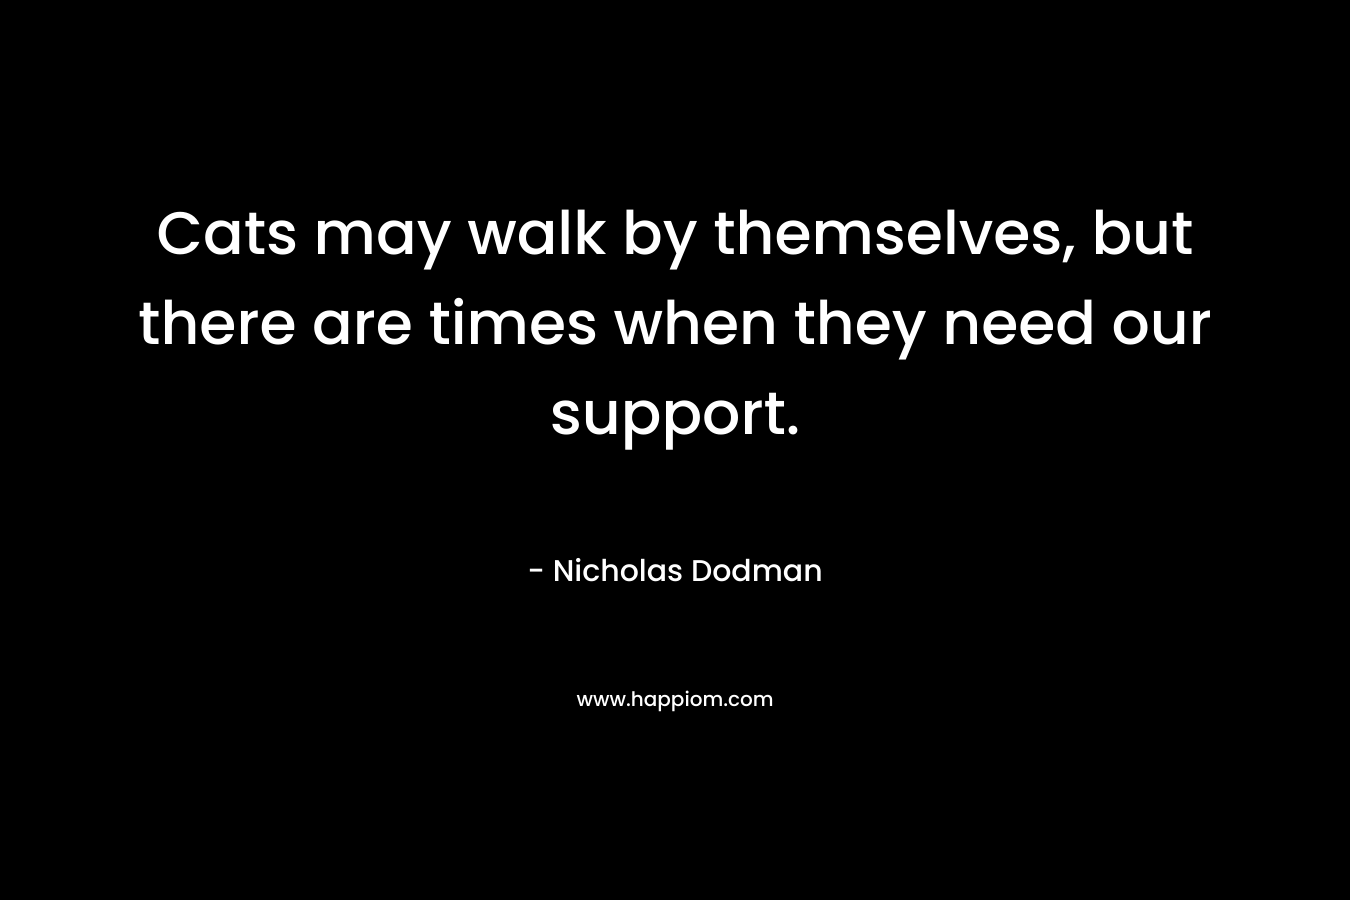 Cats may walk by themselves, but there are times when they need our support. – Nicholas Dodman